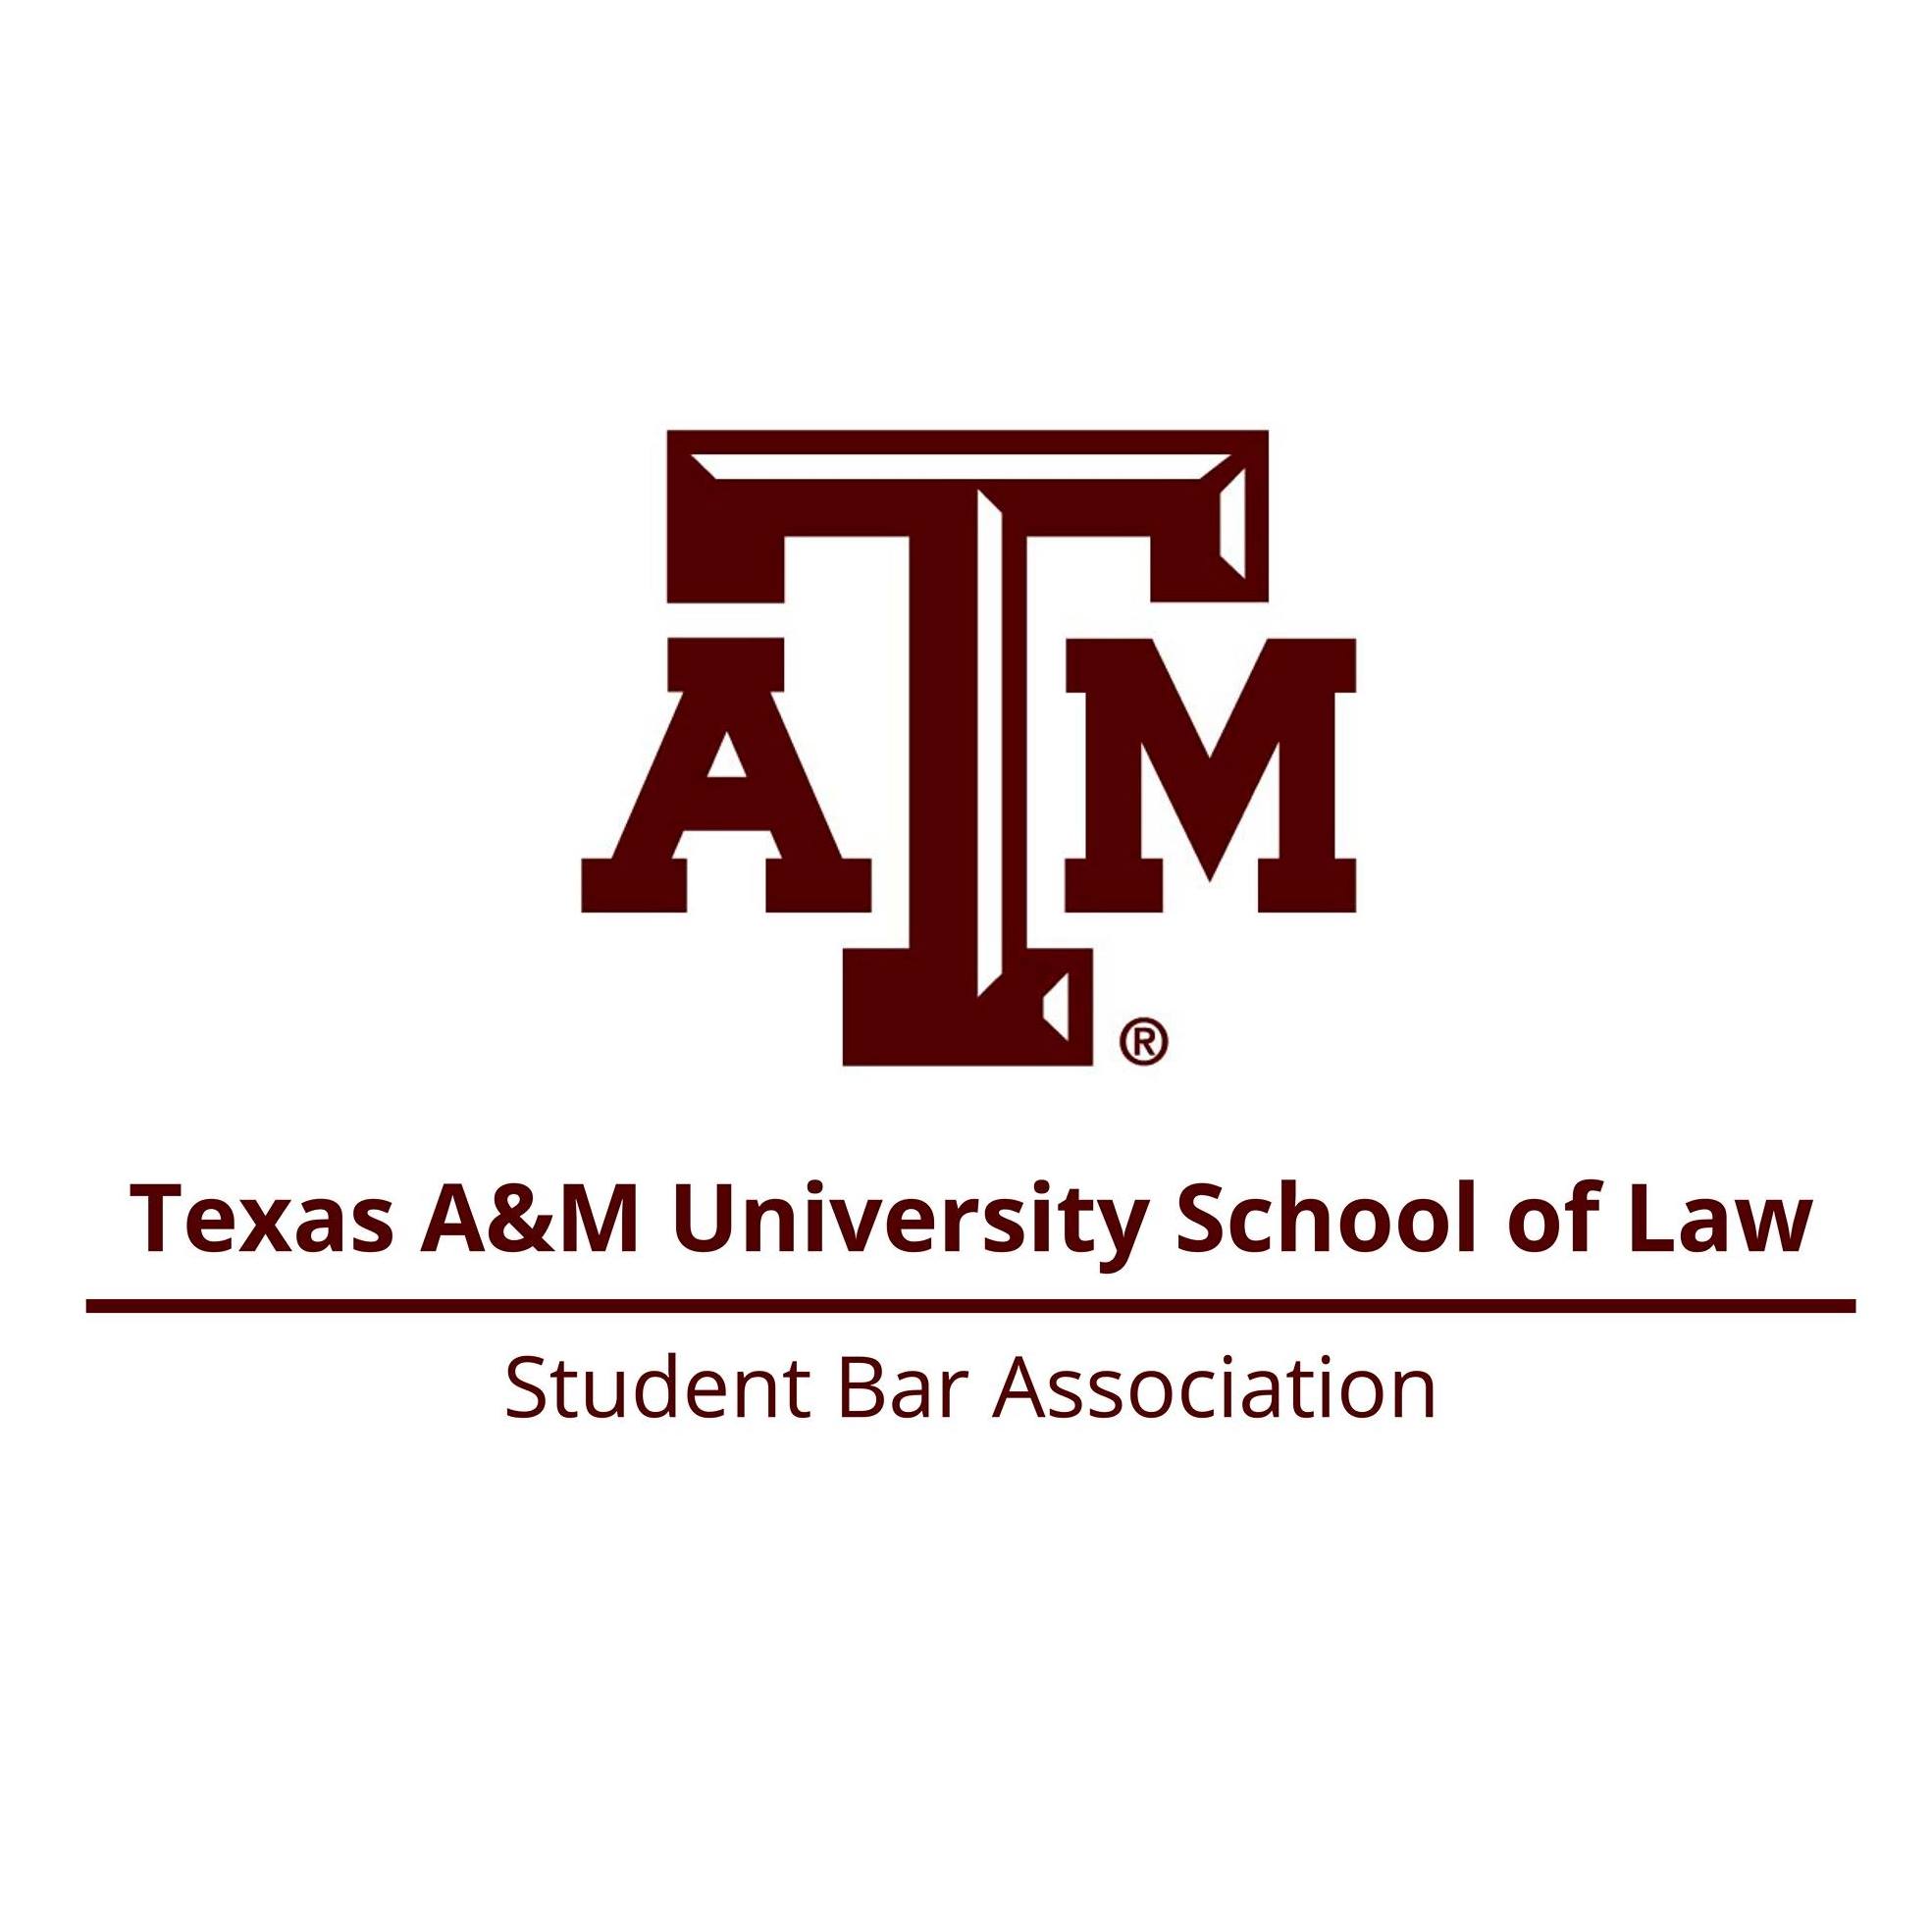 Donate to the Student Bar Association